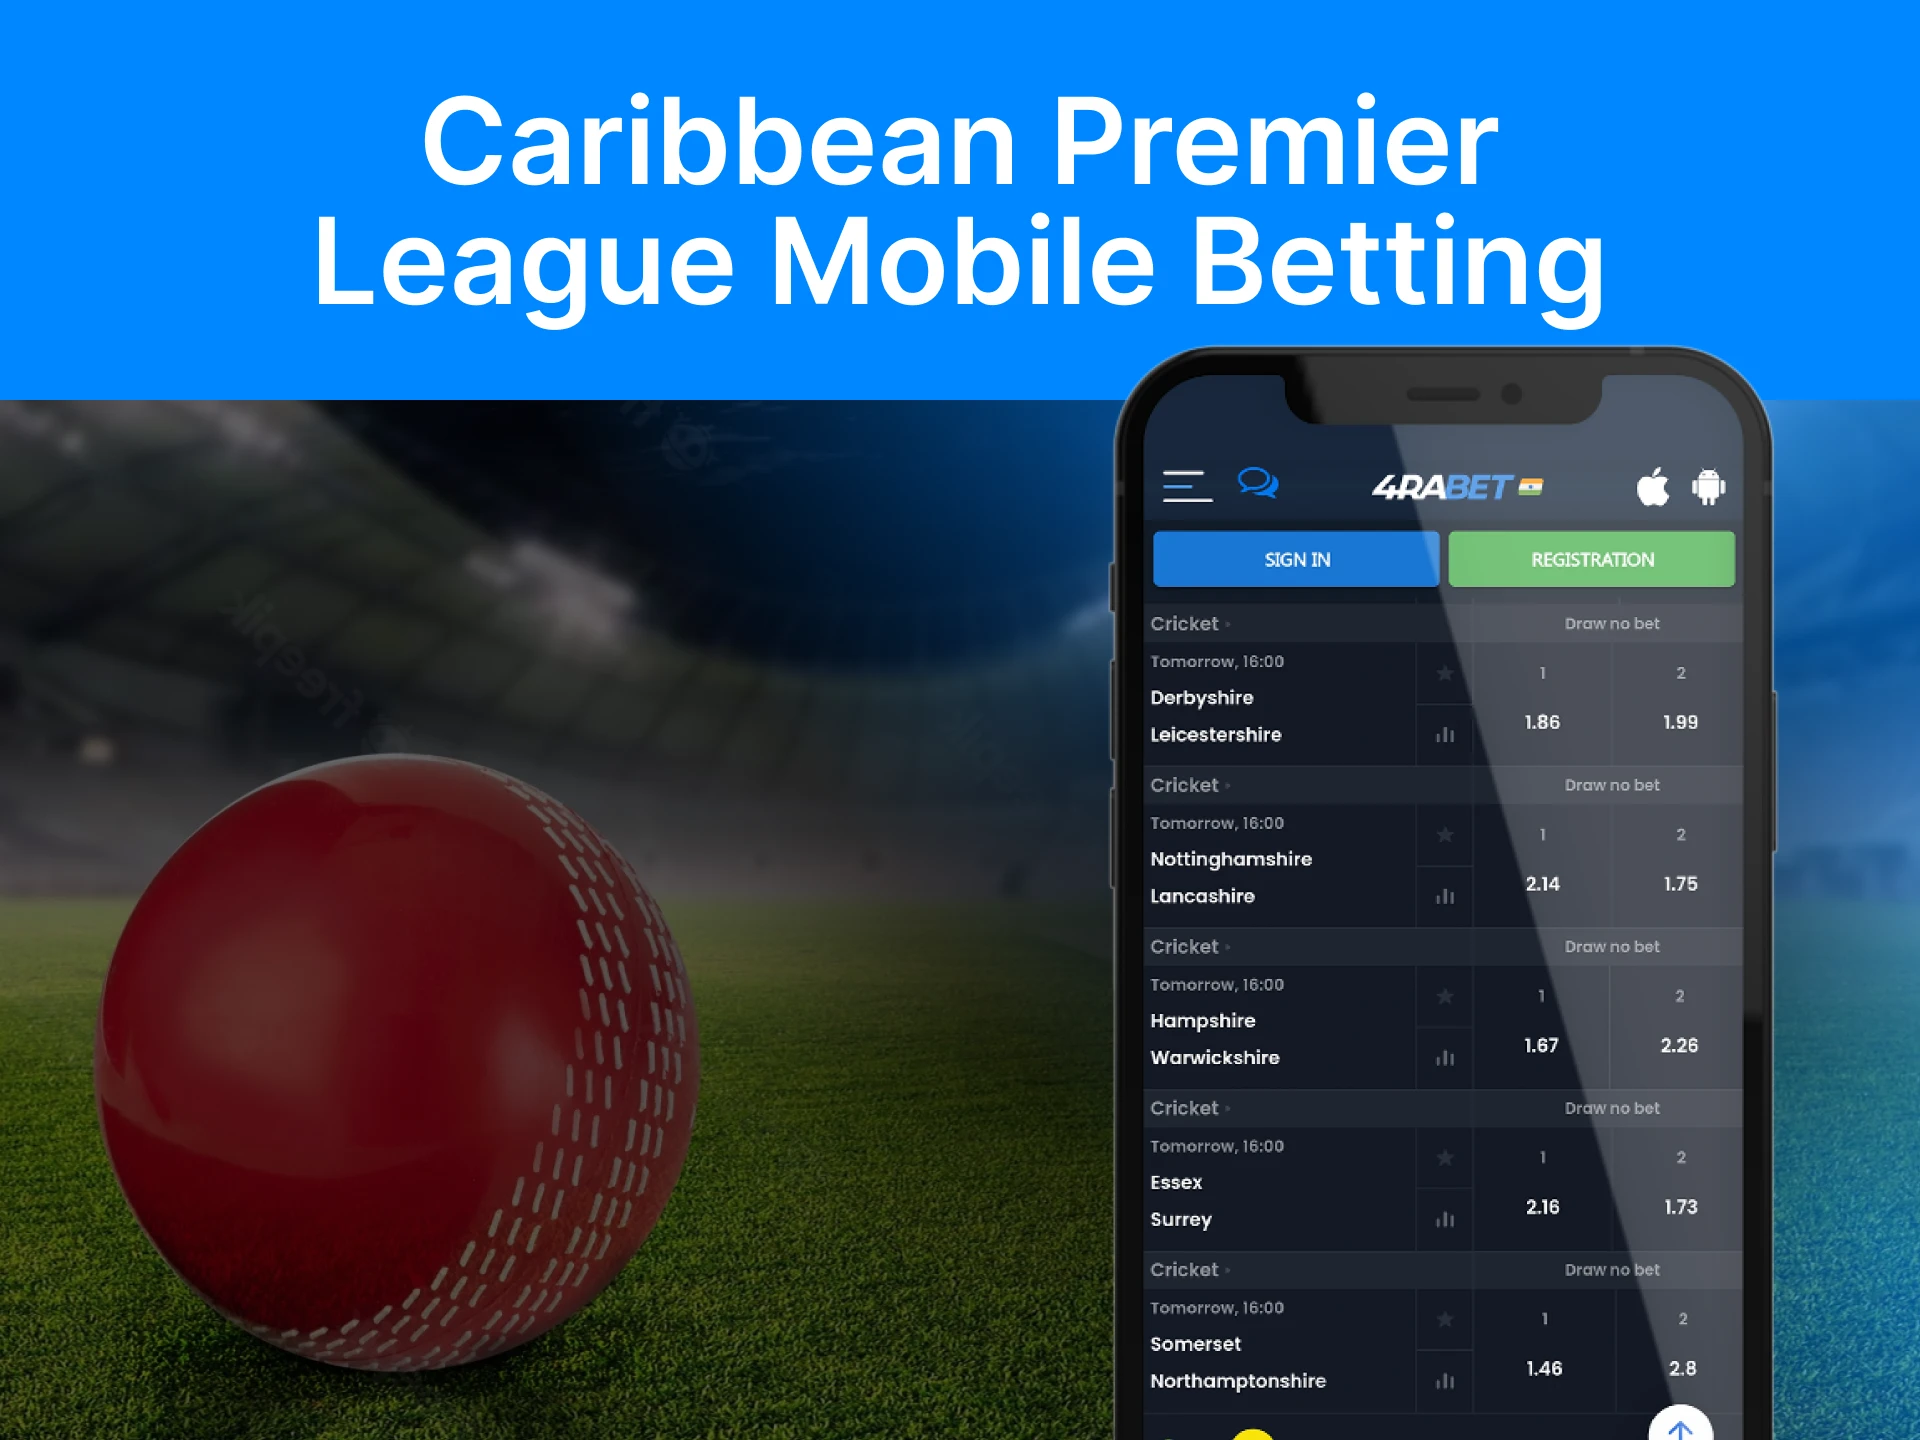 Betting on CPL matches is available in most apps.